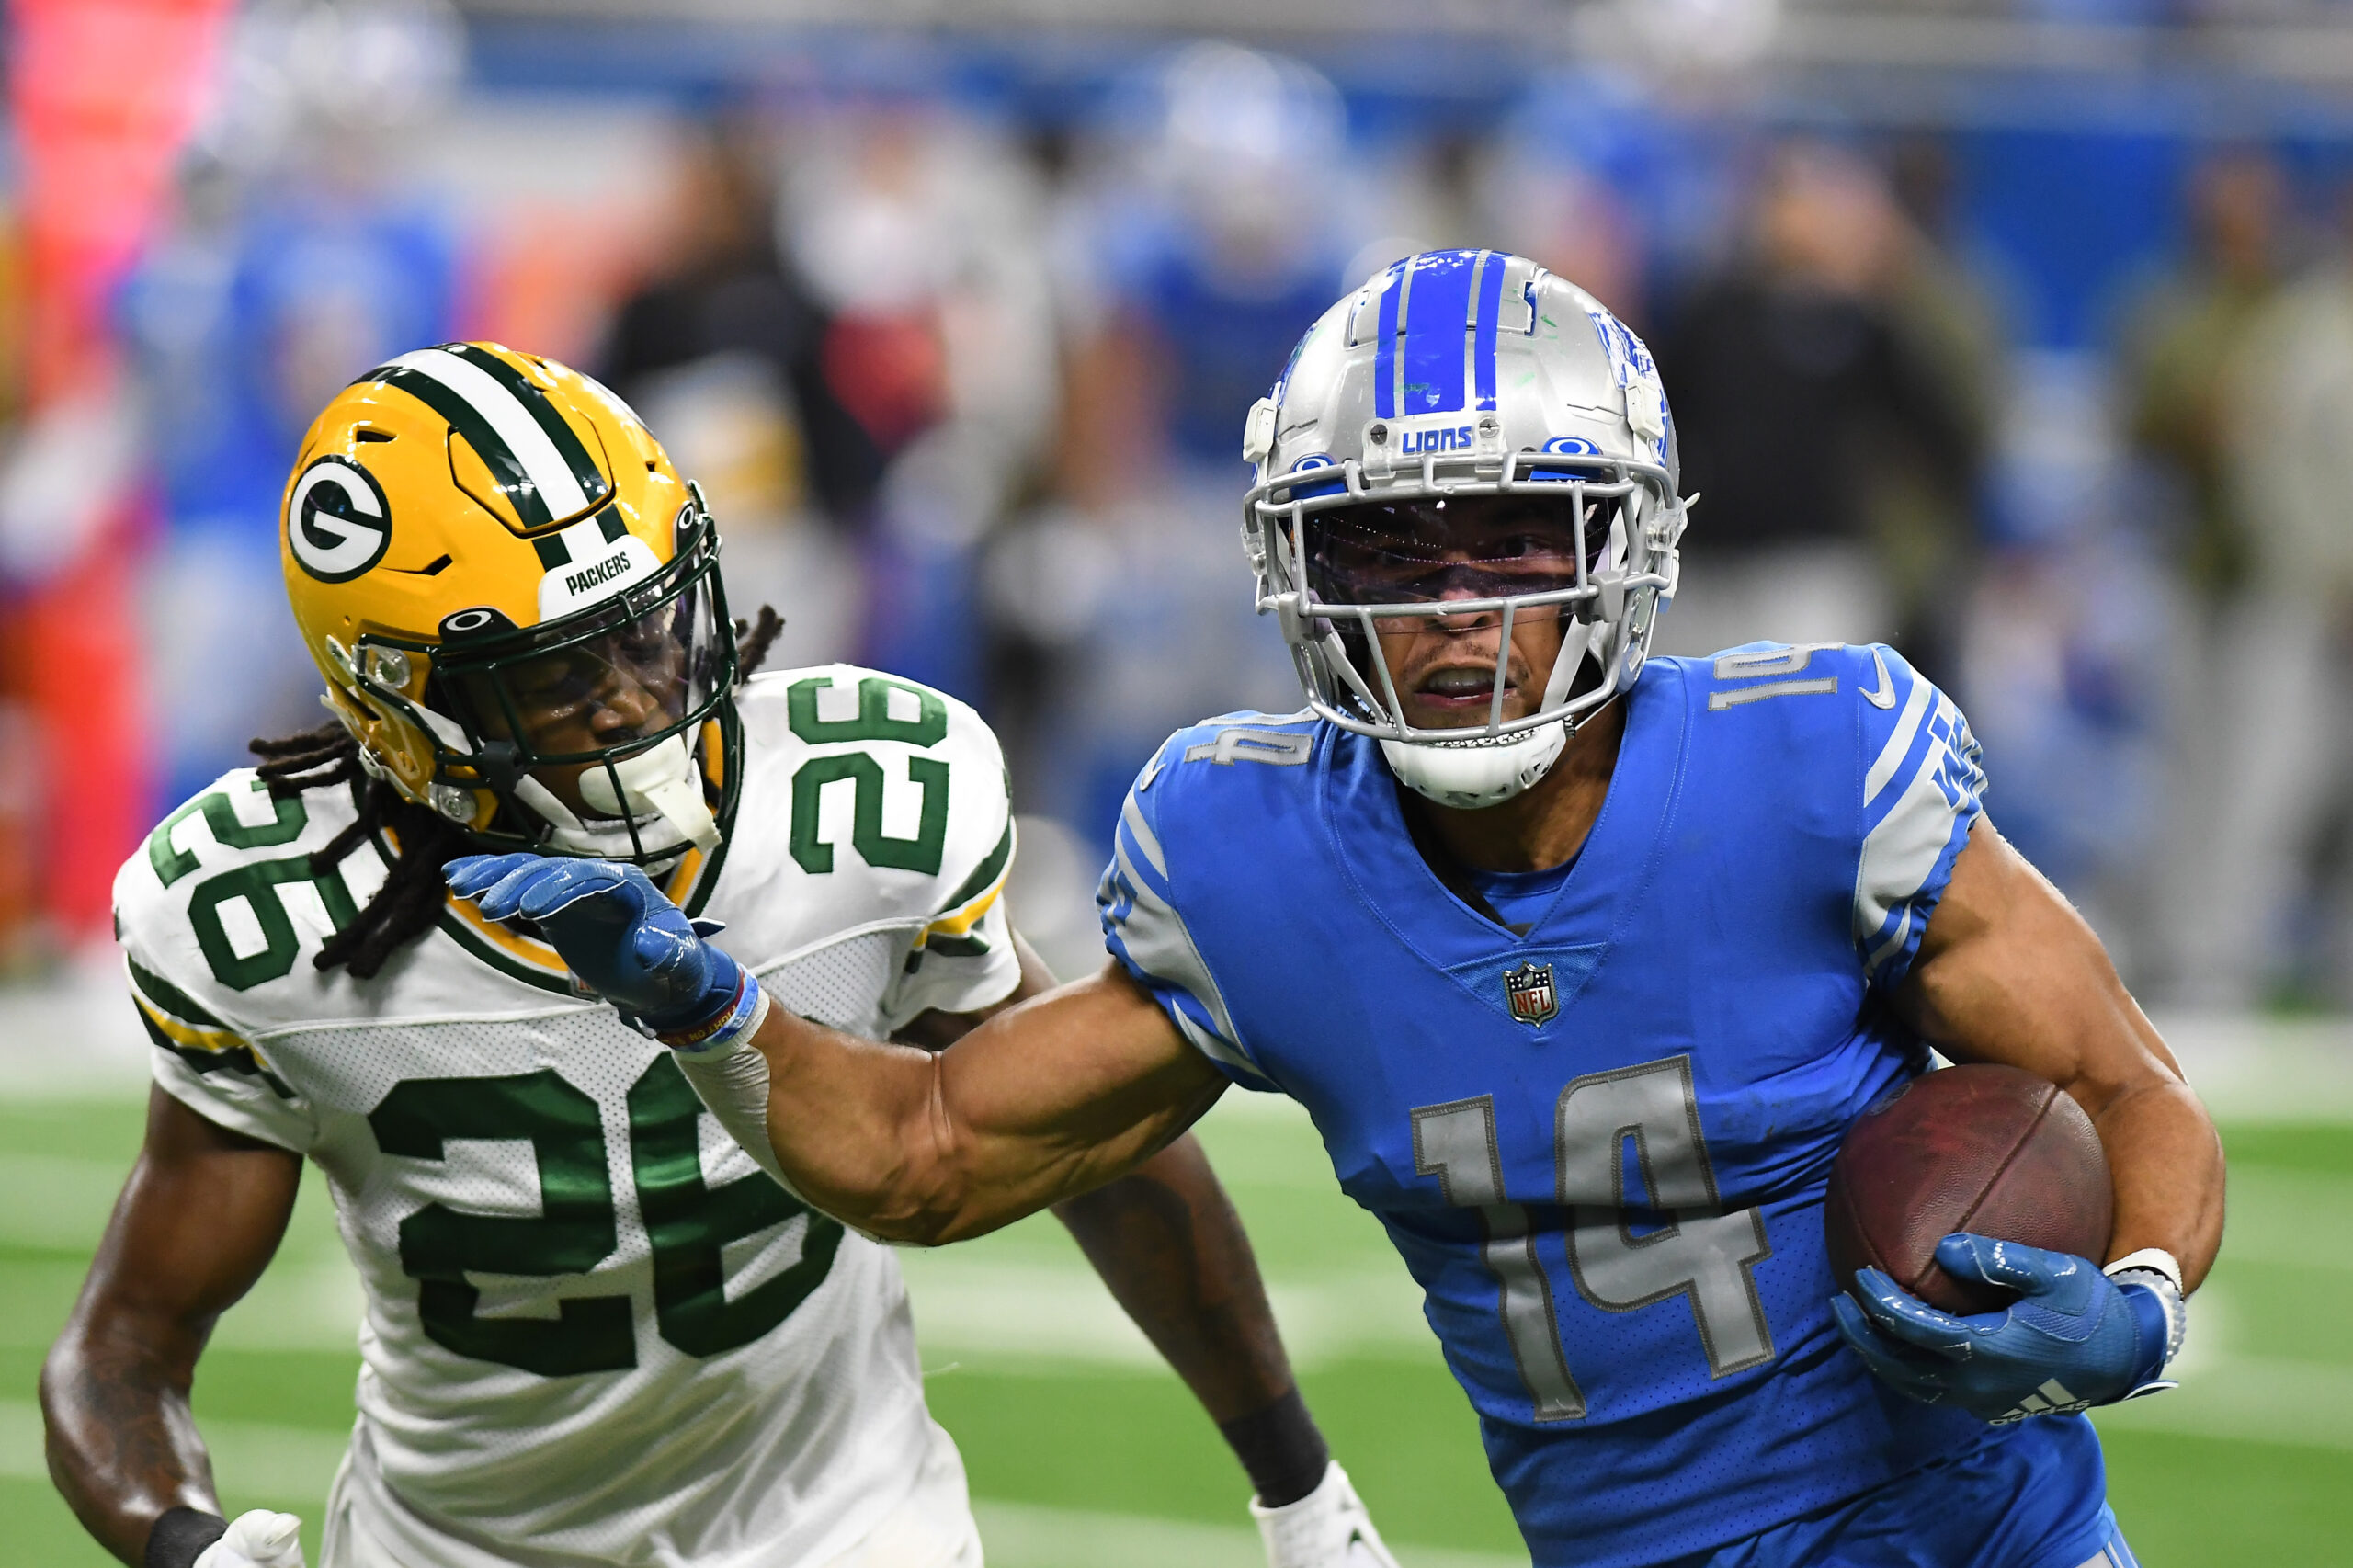 NFL Live In-Game Betting Tips & Strategy: Lions vs. Packers – Week 4